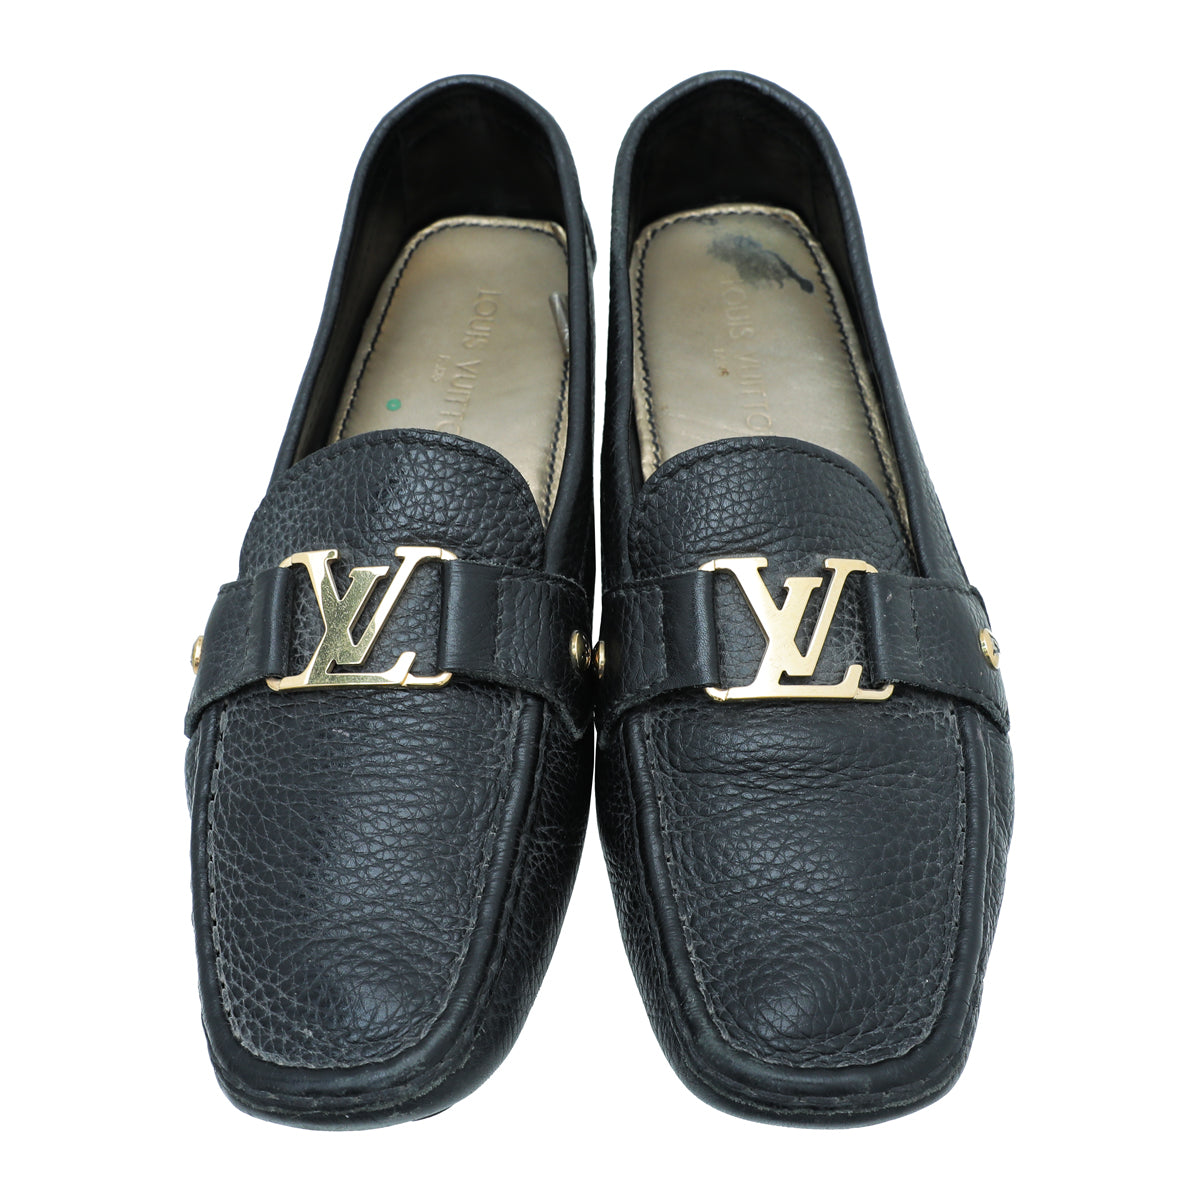 Louis Vuitton Black Leather Monte Carlo Mocassin Loafer - Free Shipping!